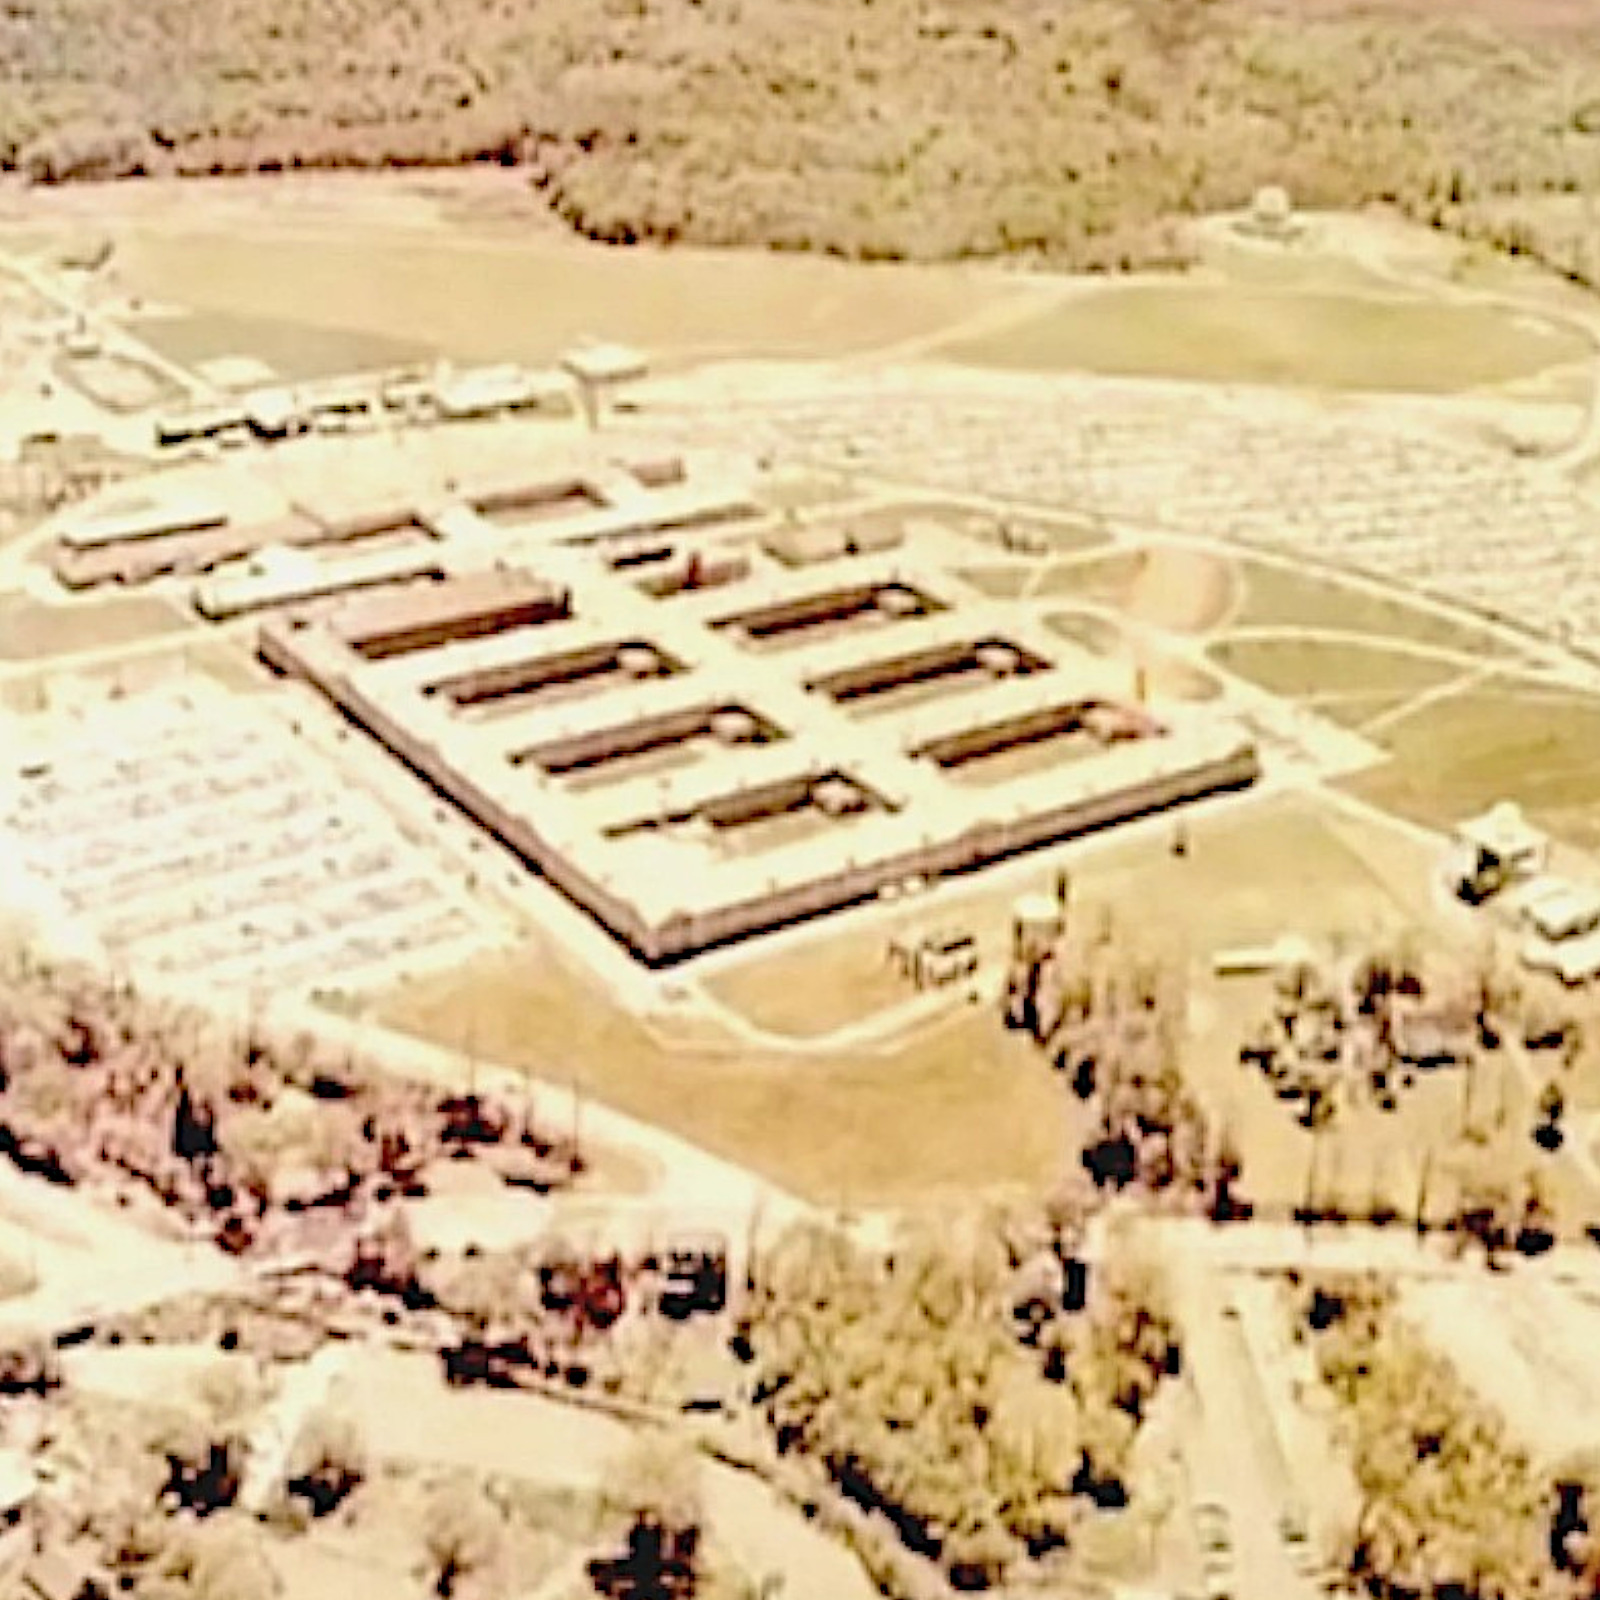 Government Facility Photo Birds Eye View Unknown Large Military Complex Vintage